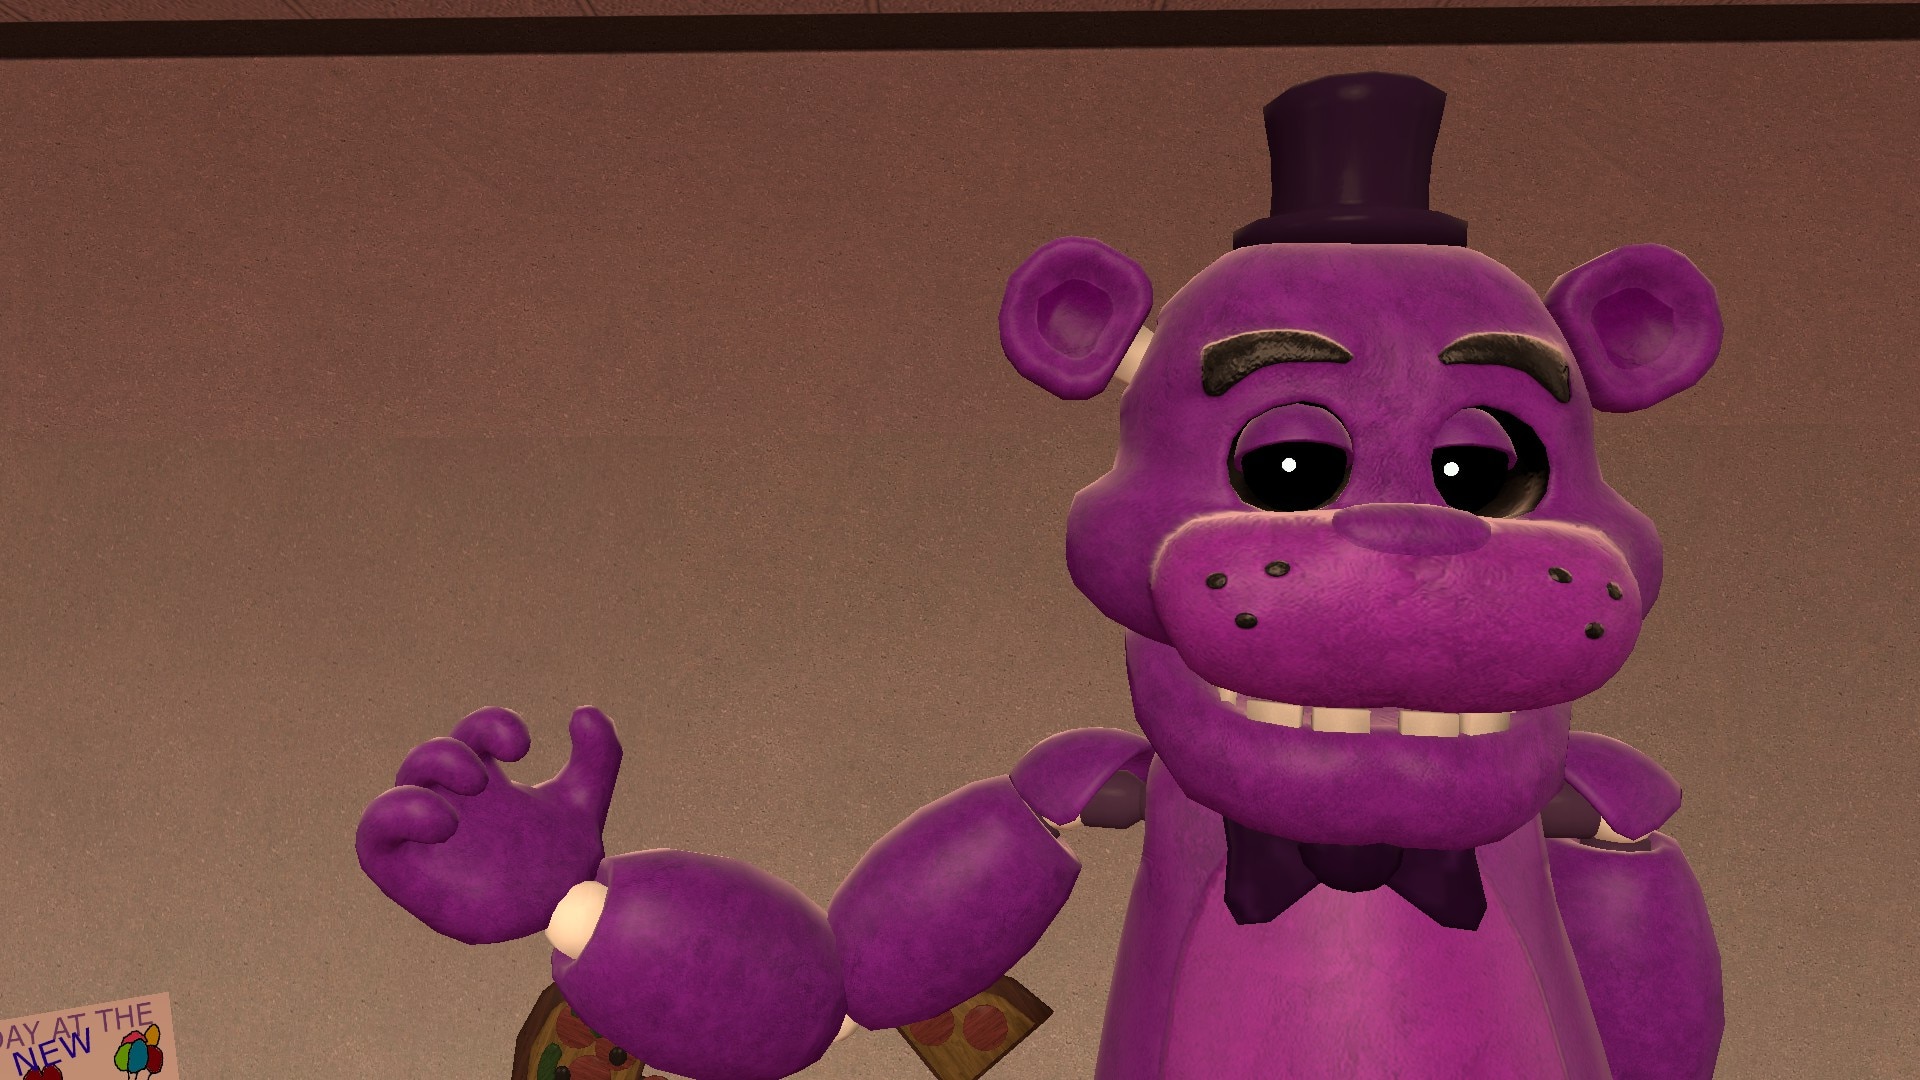 Five Nights at Freddy's: Killer in Purple by Goldie Entertainment - Game  Jolt